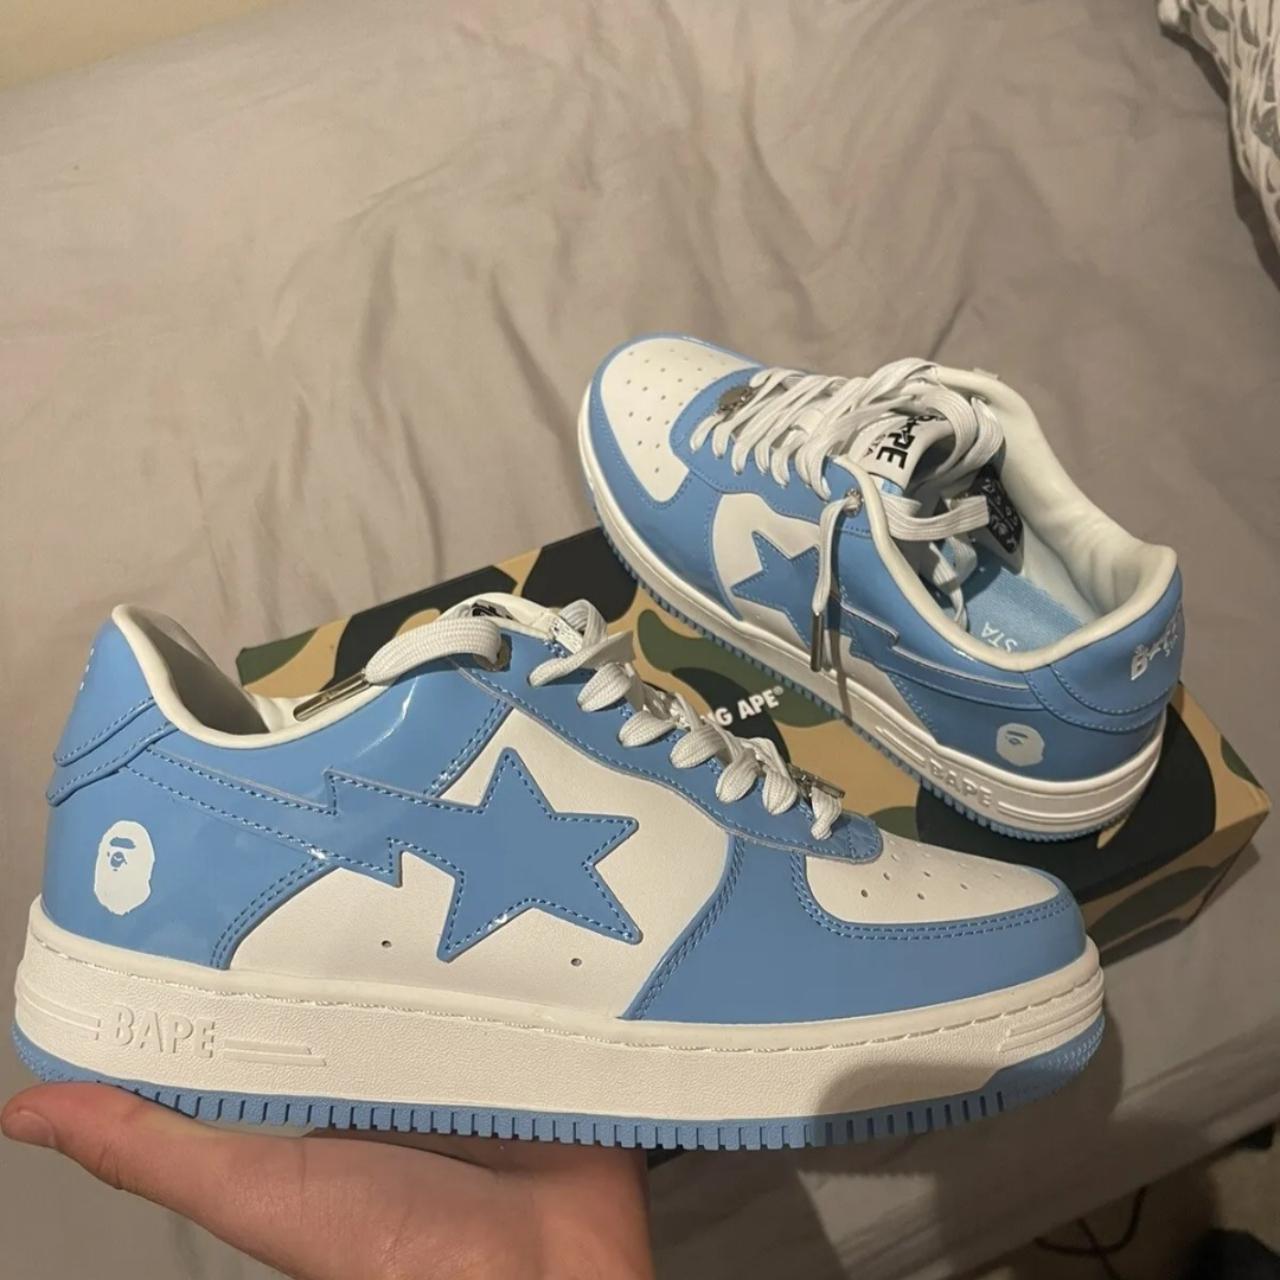 Bapesta University Blue All sizes available If your... - Depop